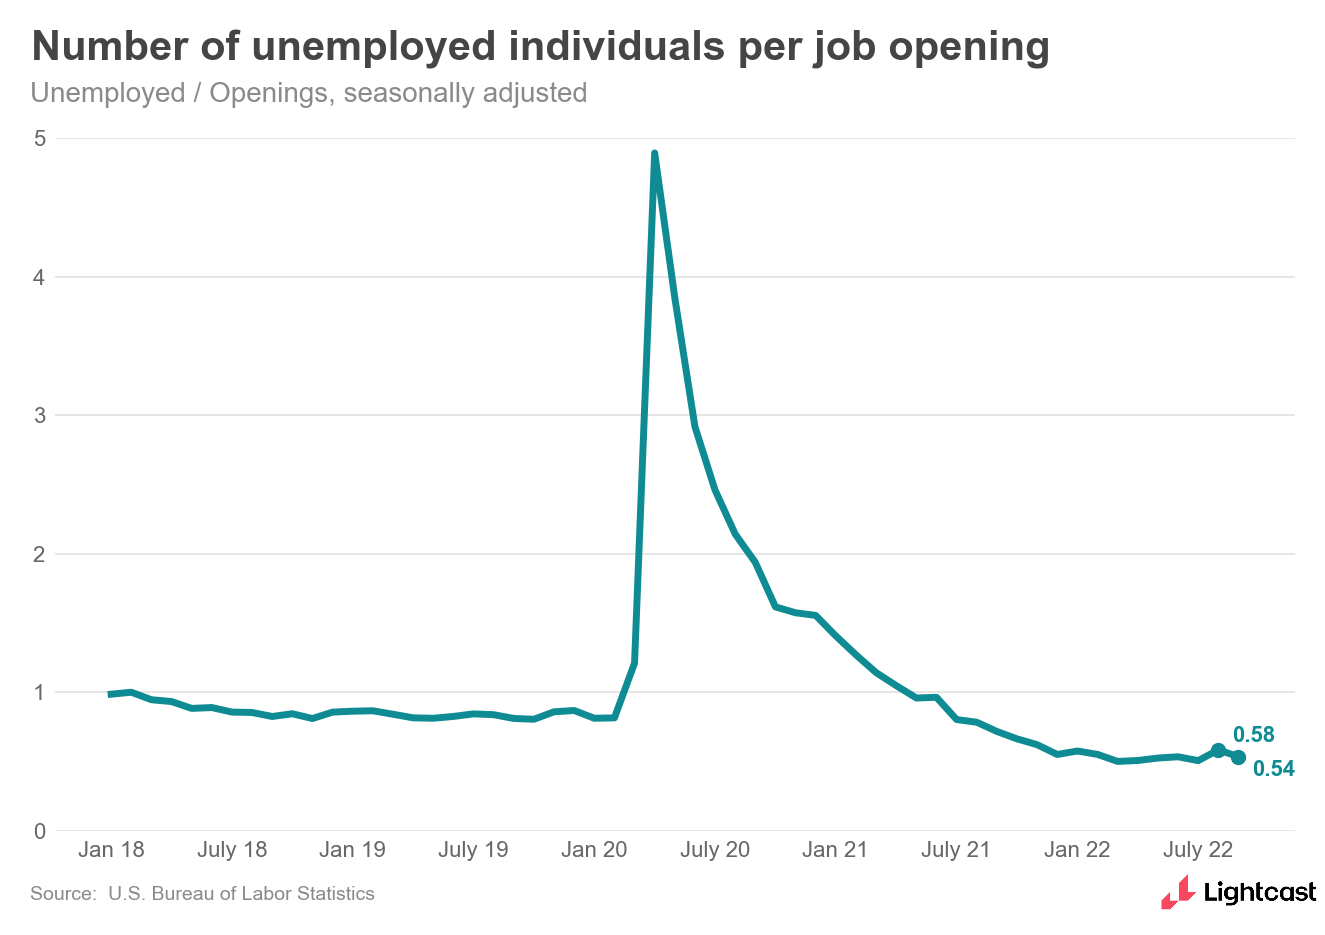 ratio of unemployed individuals per job opening, down to 0.54 from 0.58